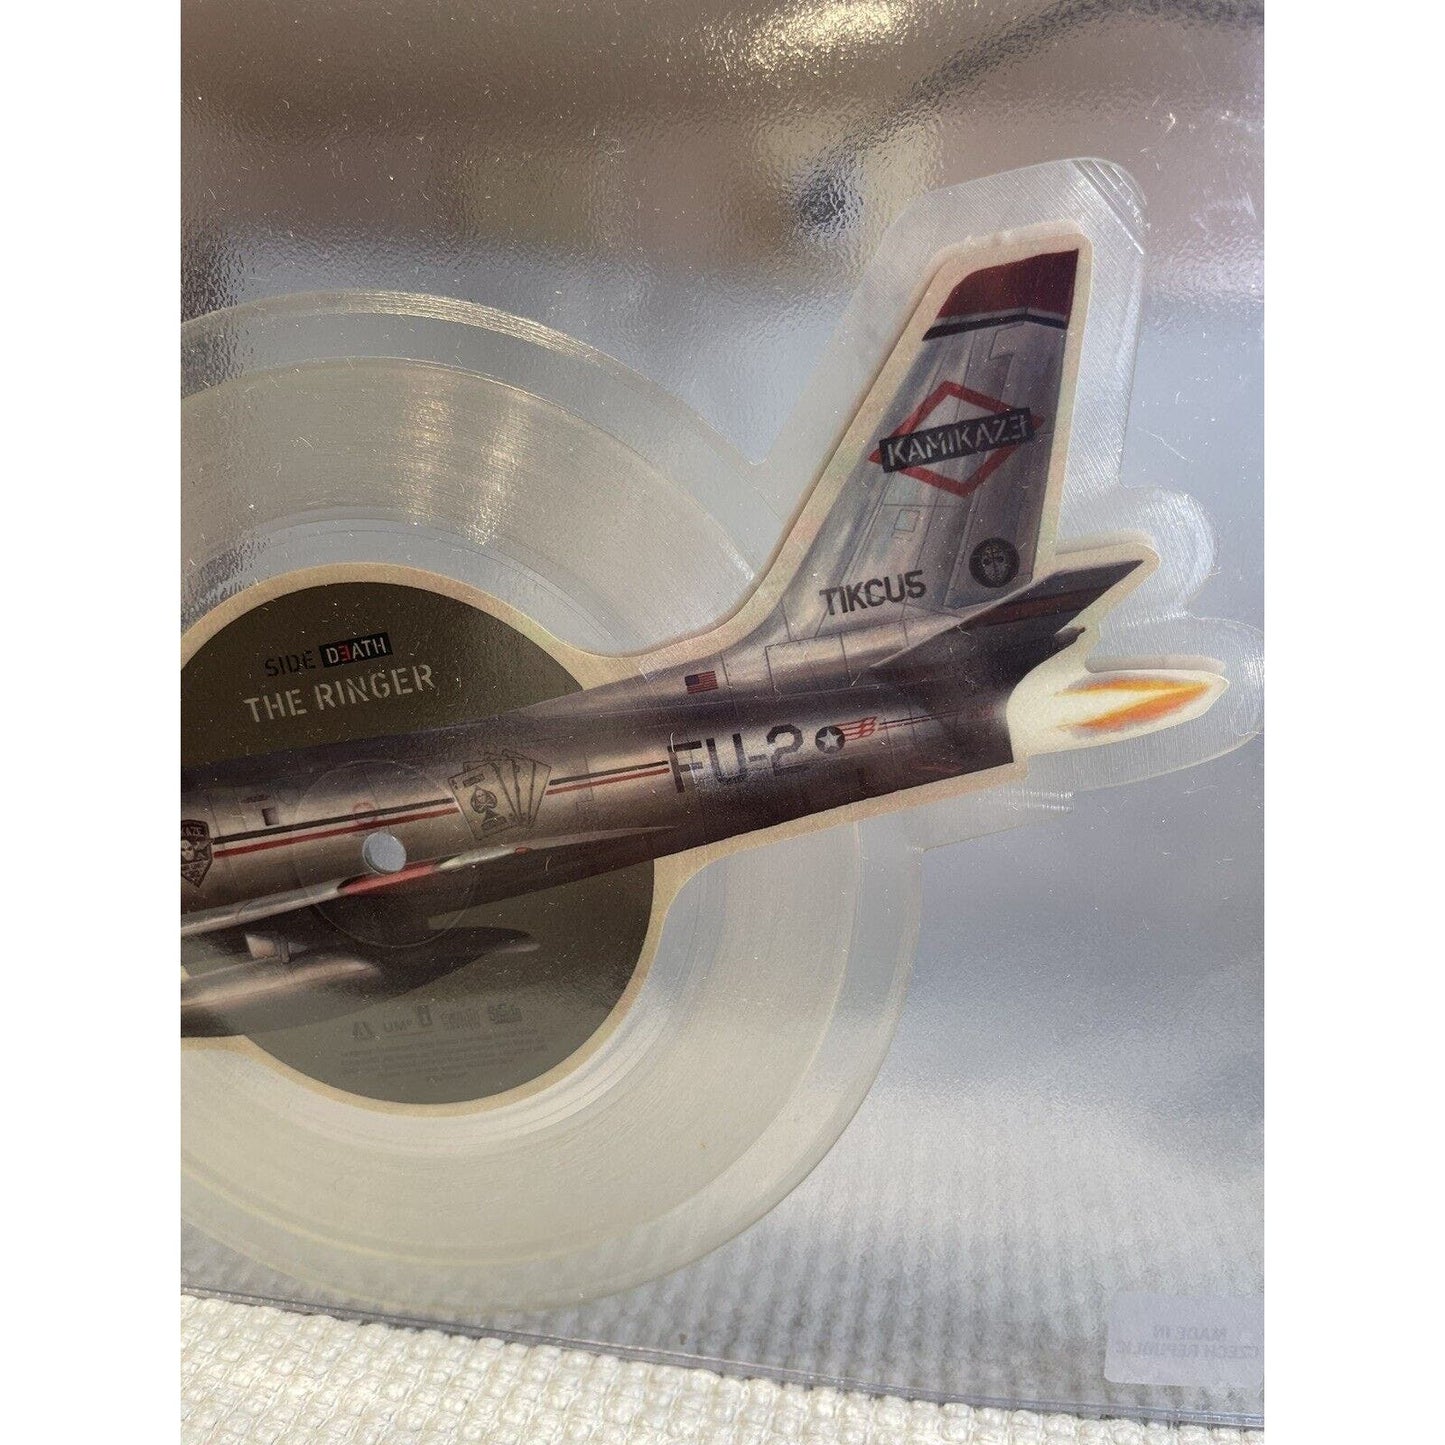 Limited Edition Eminem Kamikaze 5th Anniversary 7" Picture Disc SOLD OUT Mint